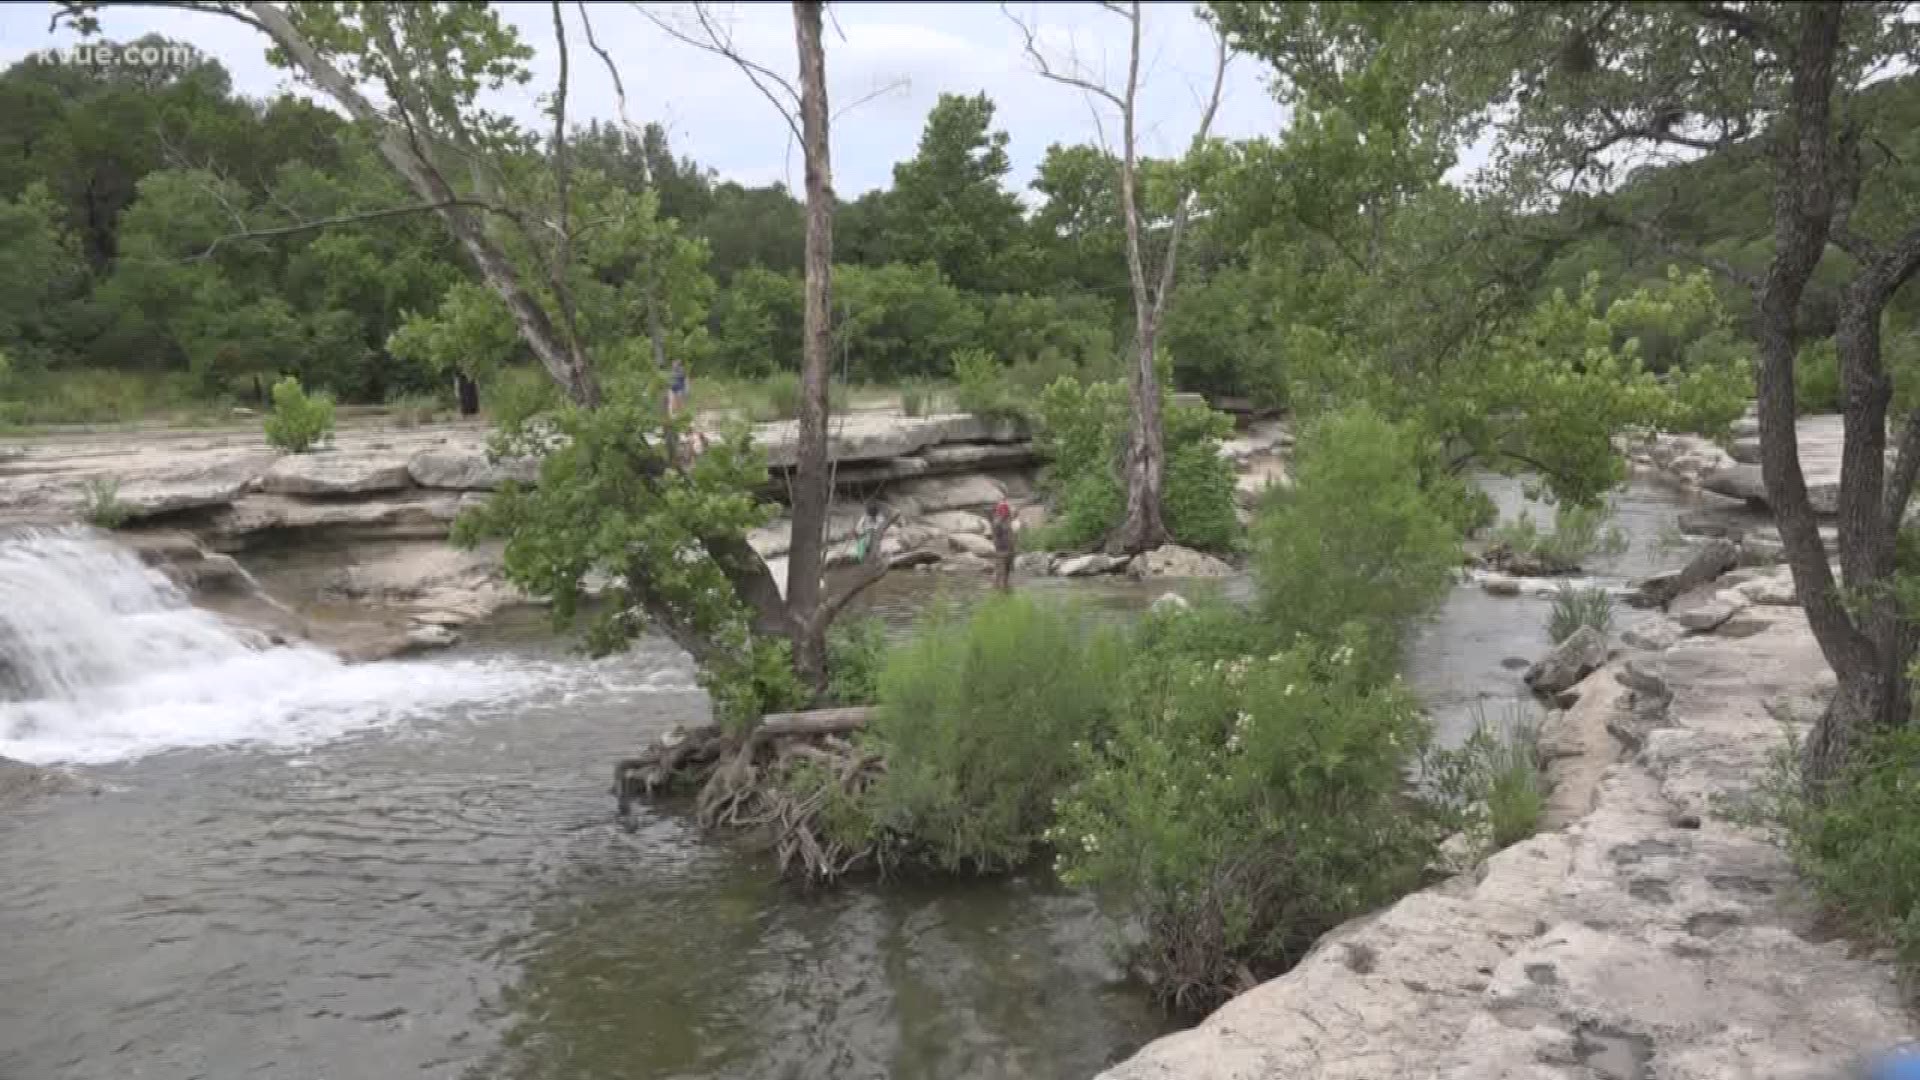 At least three people were injured near Austin-area waterways over the weekend.